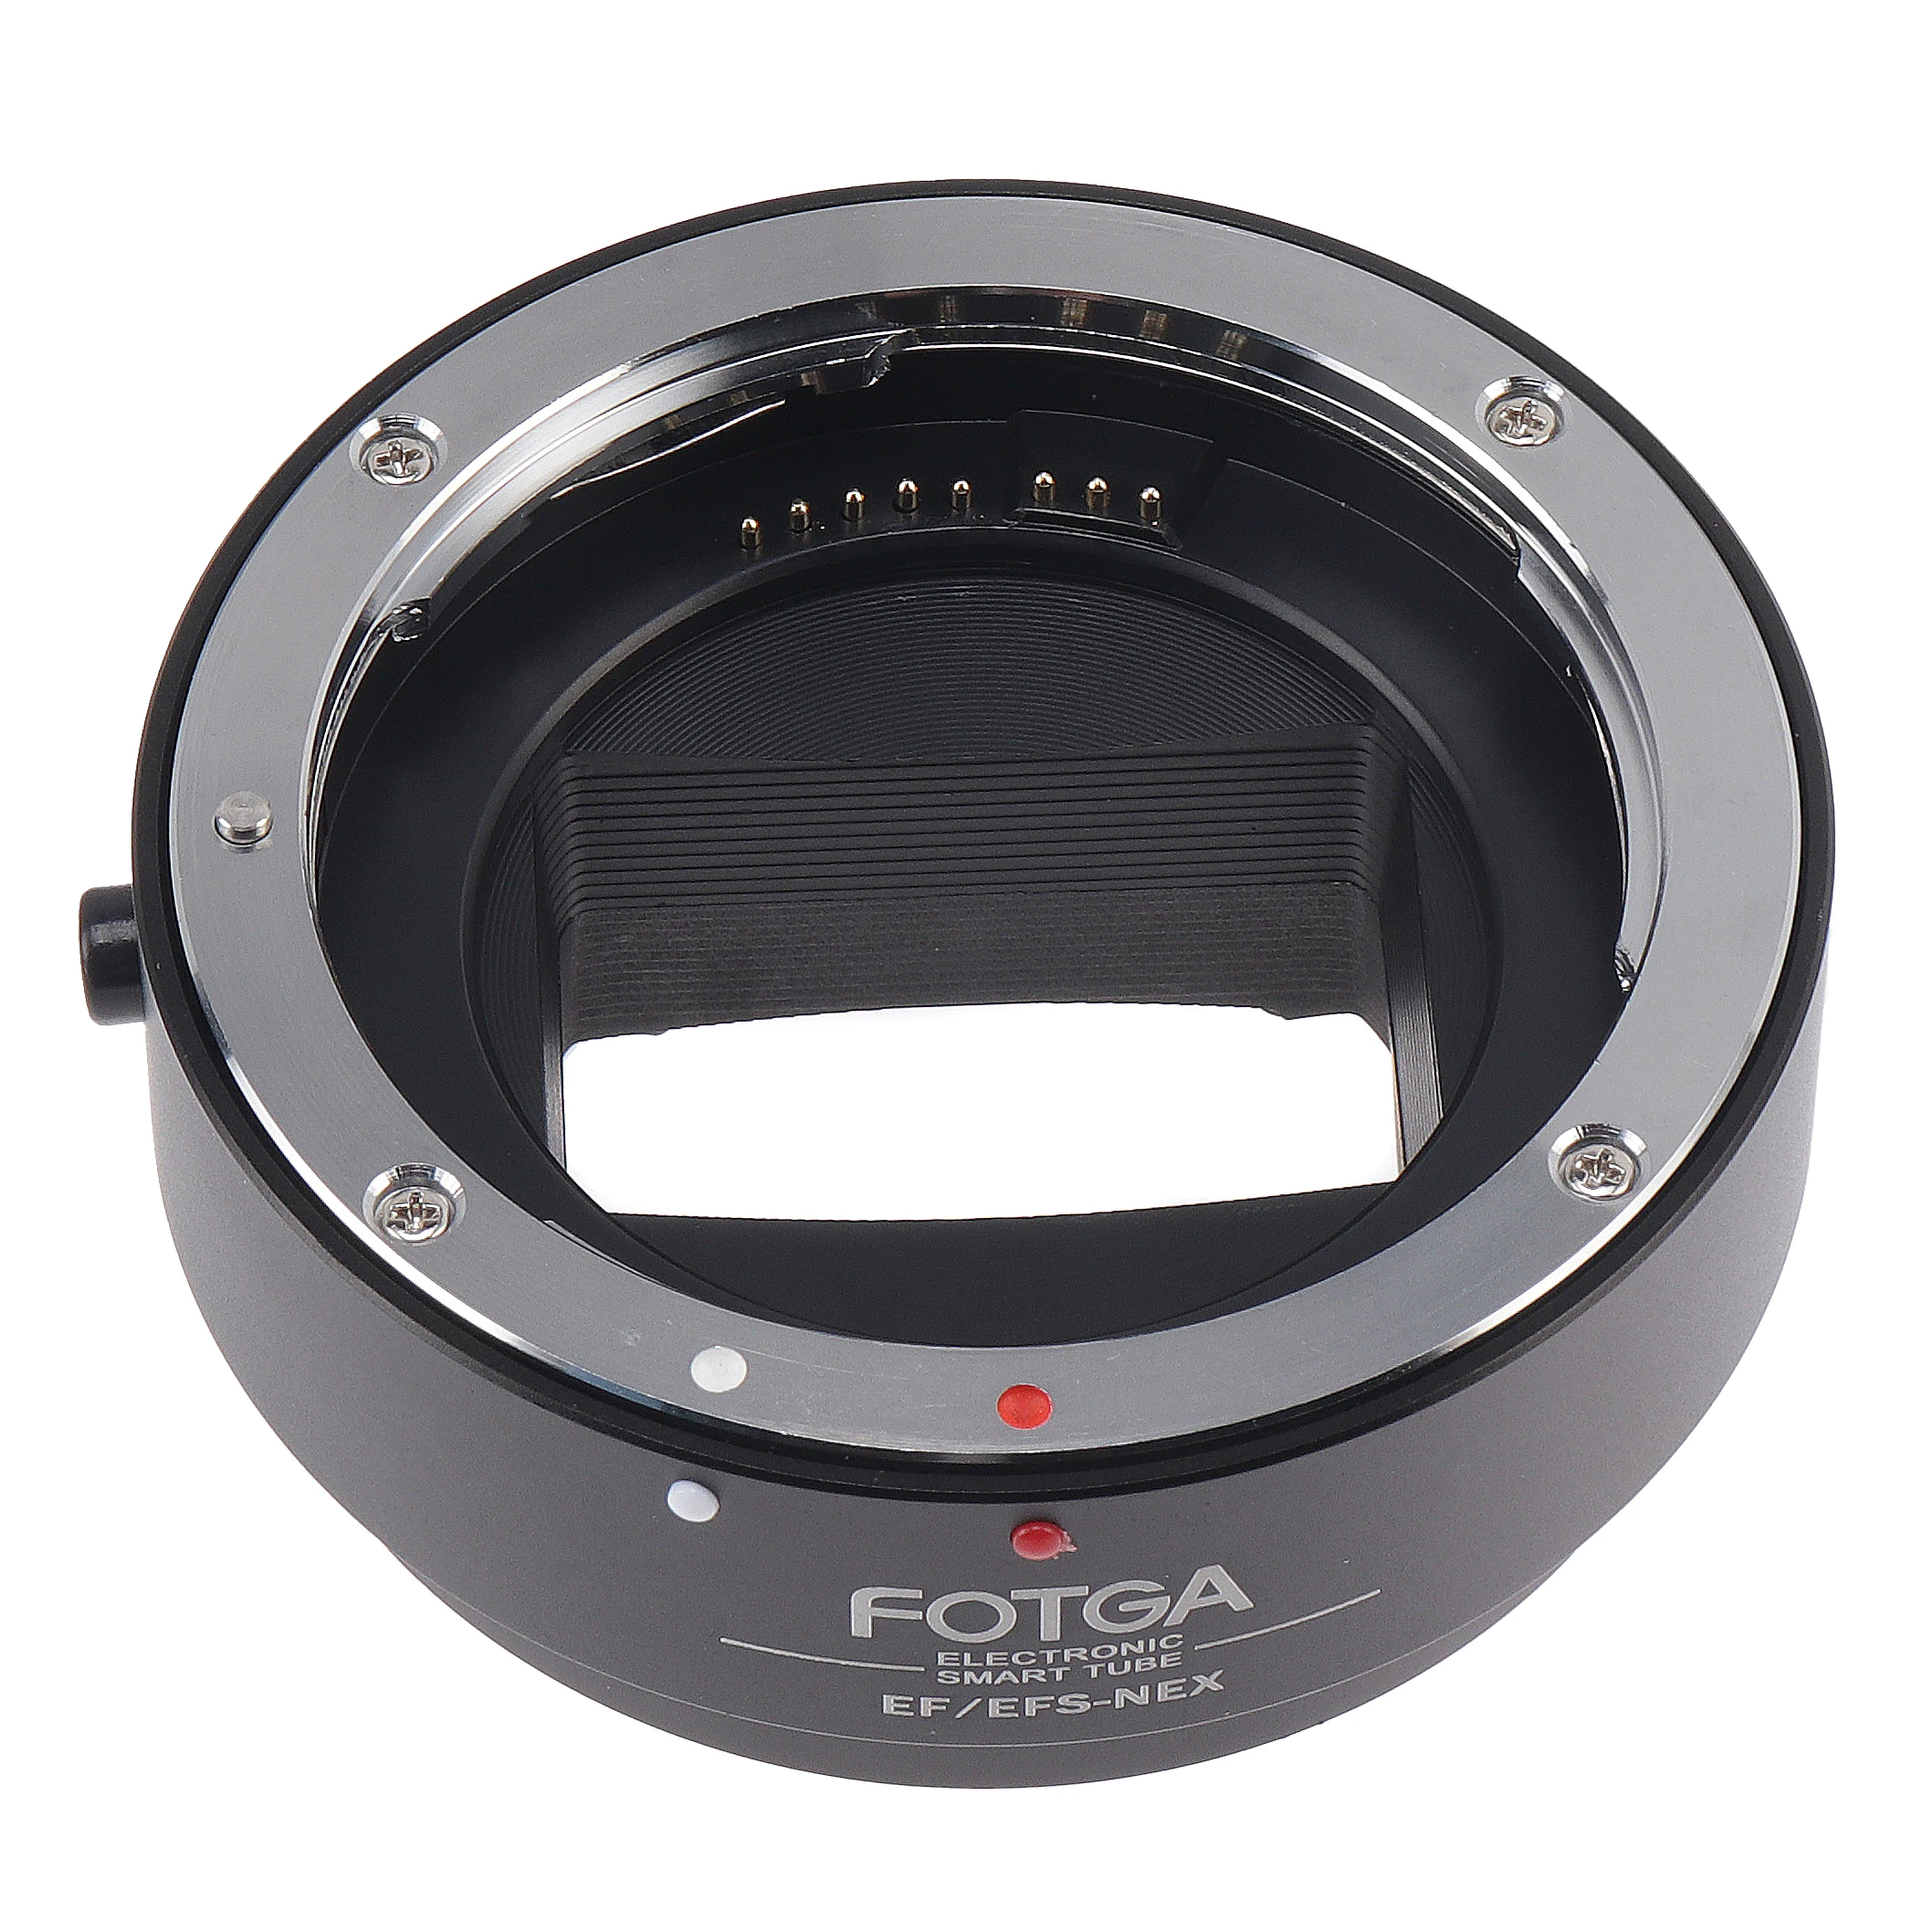 Fotga Electronic 35mm Full Frame AF Auto Focus Adapter Ring as Canon EOS EF EF-S Lens to Sony NEX E Mount Camera A7 A7R 1/4 Tripod Adapter 